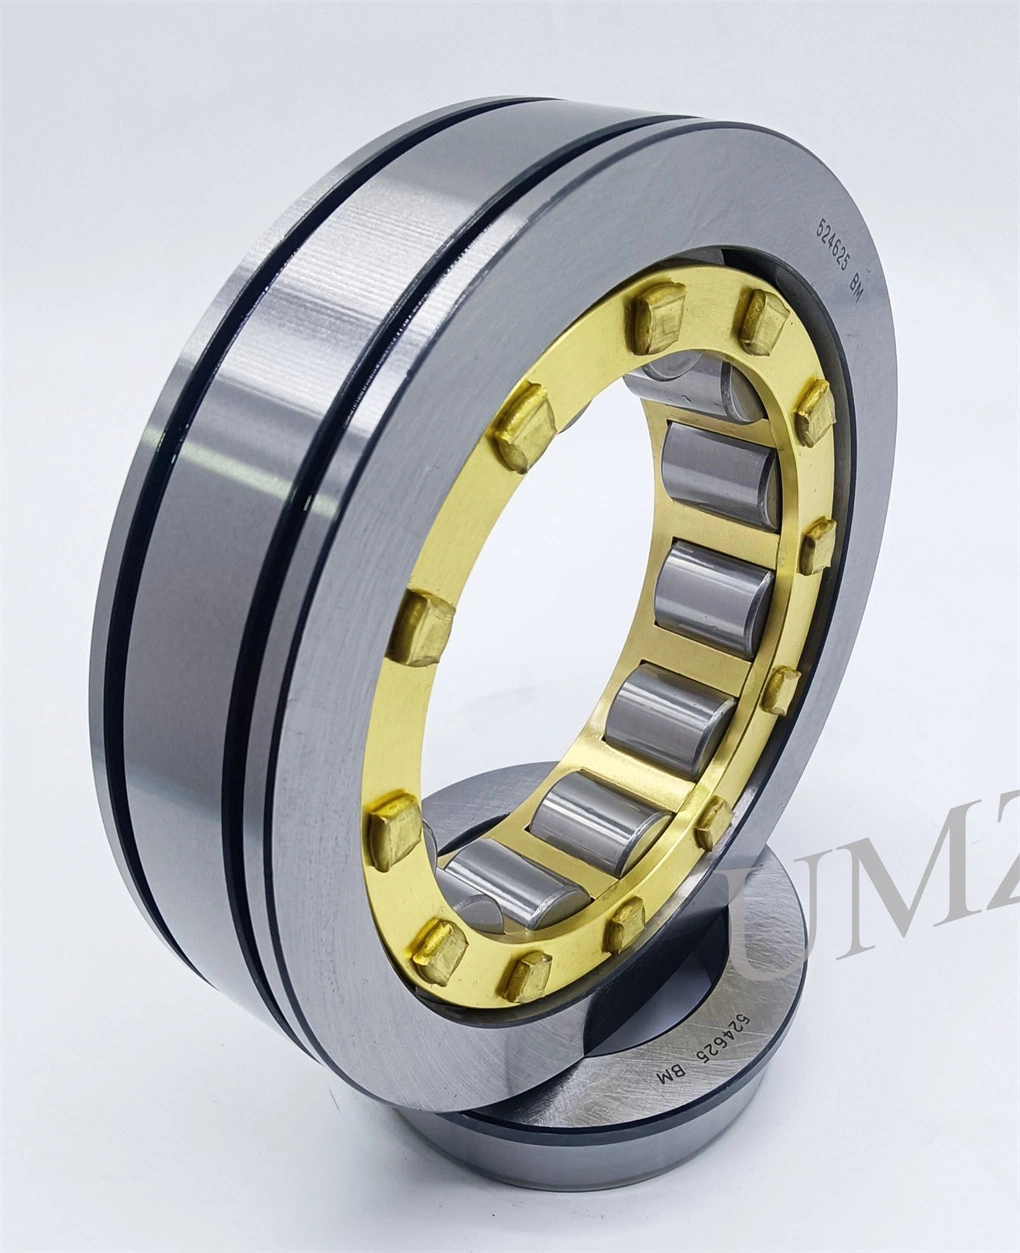 Hot Sale Gearbox Bearing 524625 539090m 512533 Cylindrical Roller Bearing with High Quality